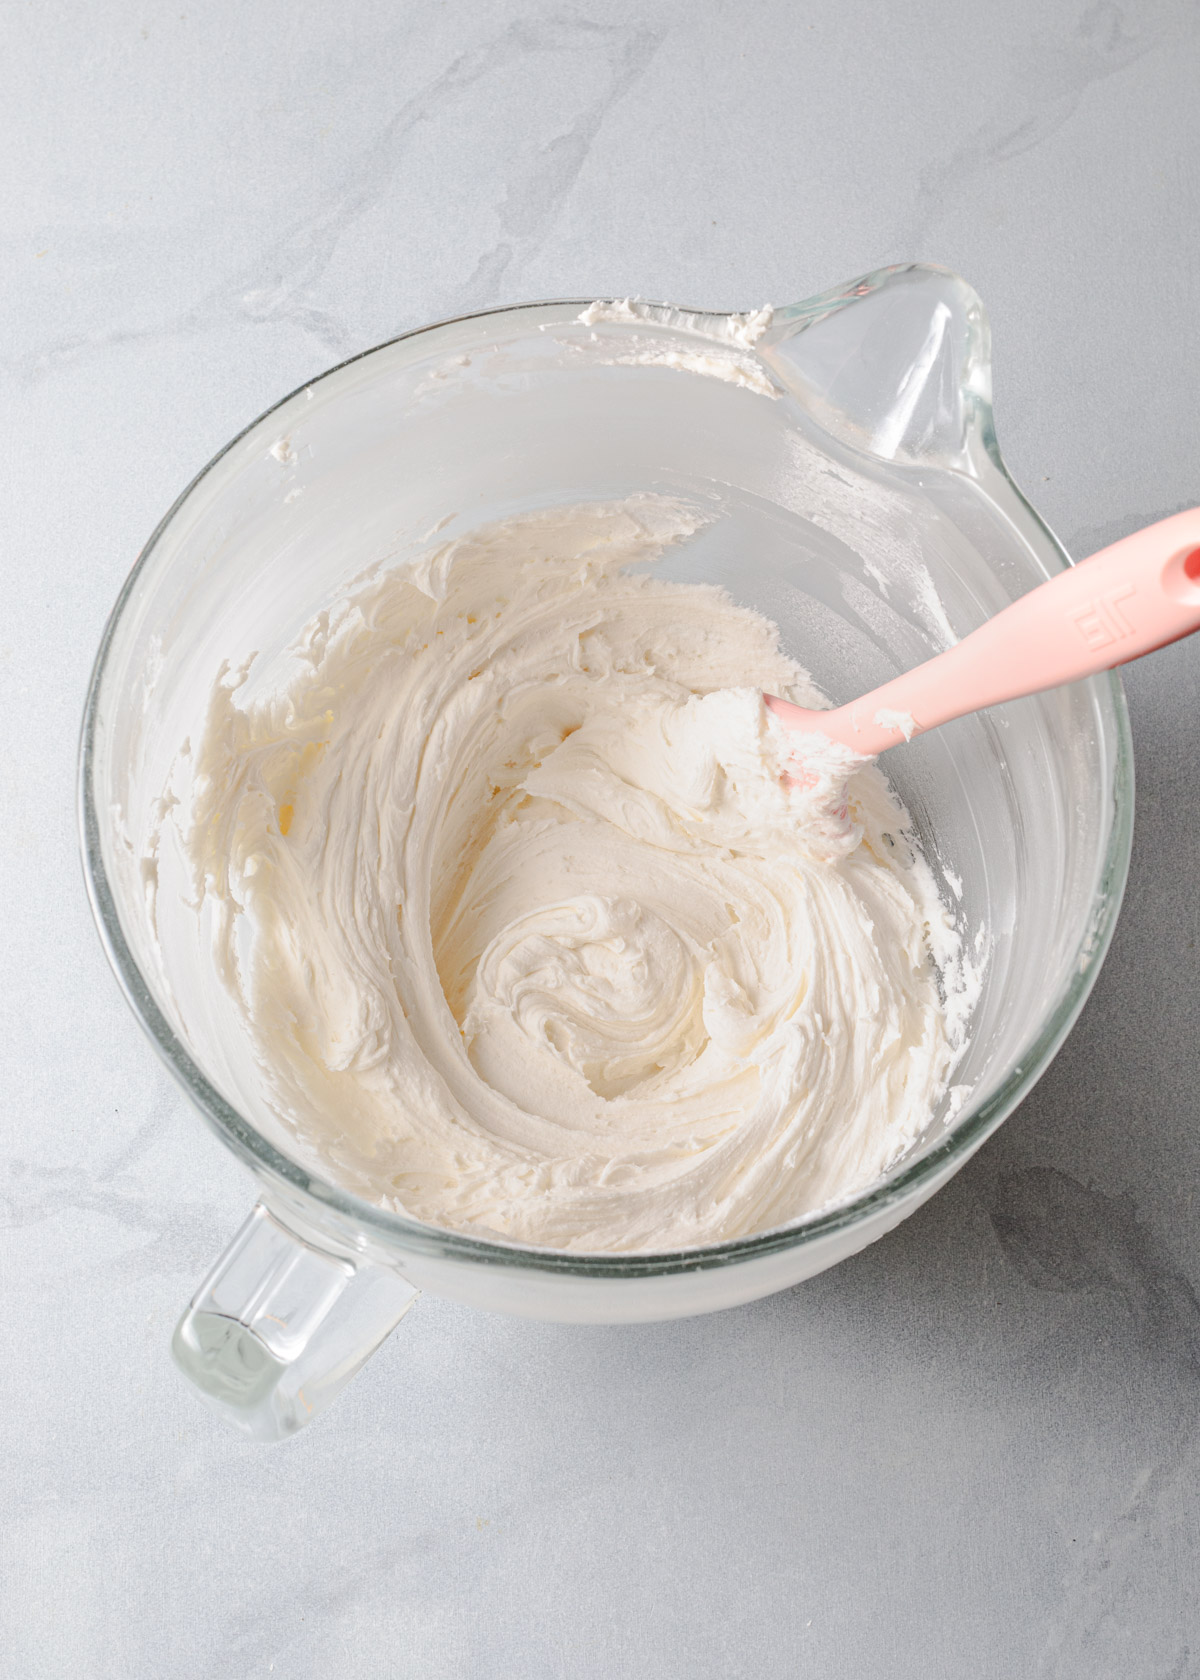 Whipped peppermint frosting in a glass mixing bowl